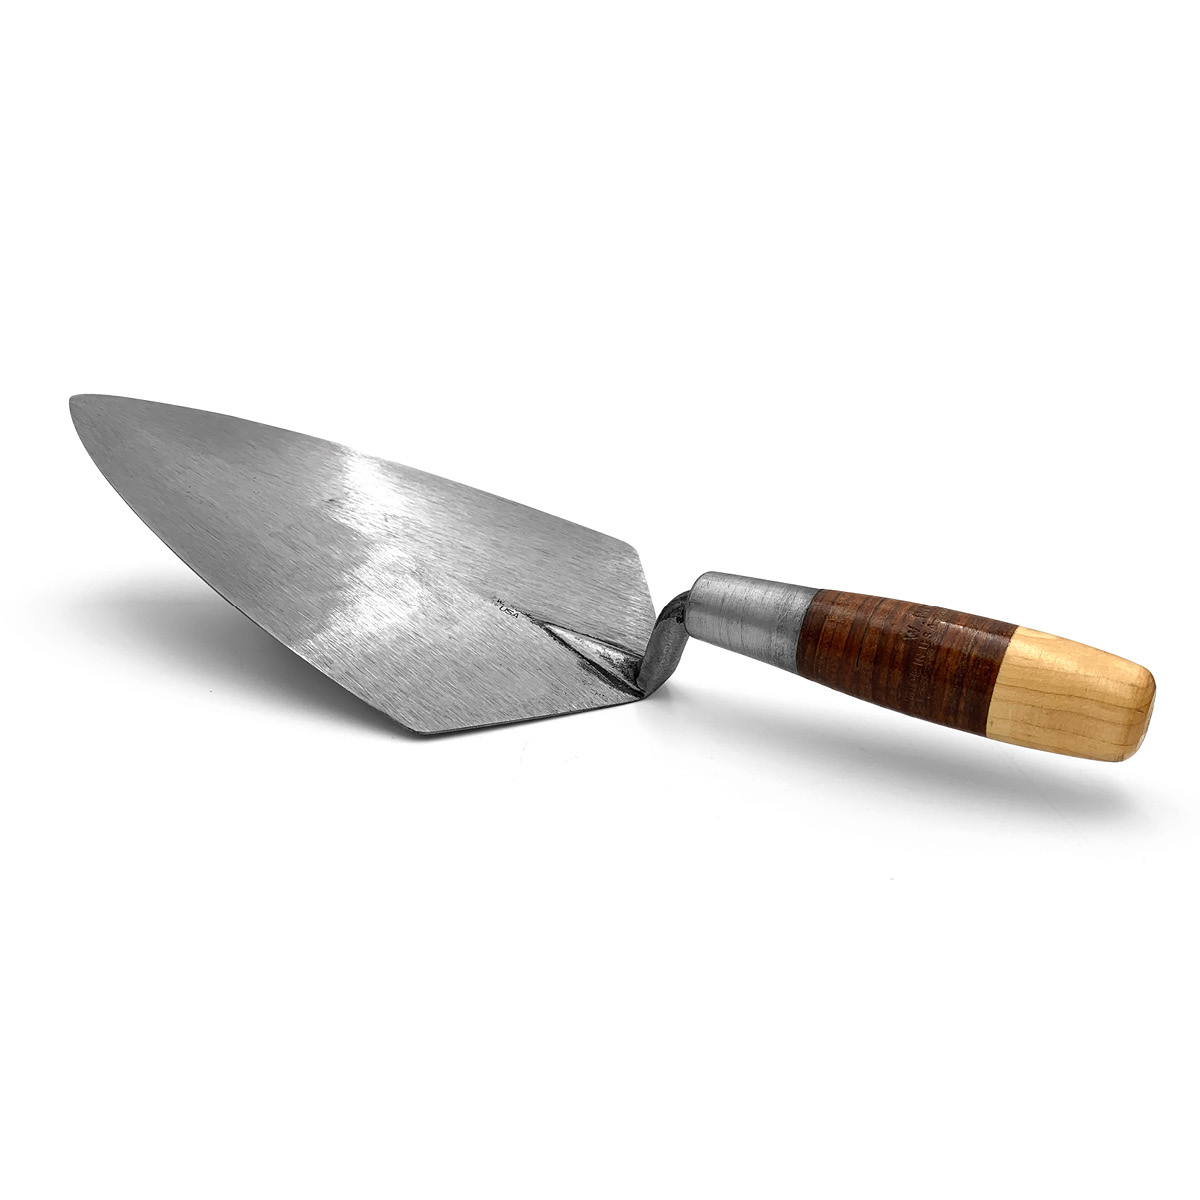 Wide heel London pattern w.rose trowels with a leather handle are popular with professional bricklayers and can now be purchased in the United Kingdom via Speedcrete and the online shop.